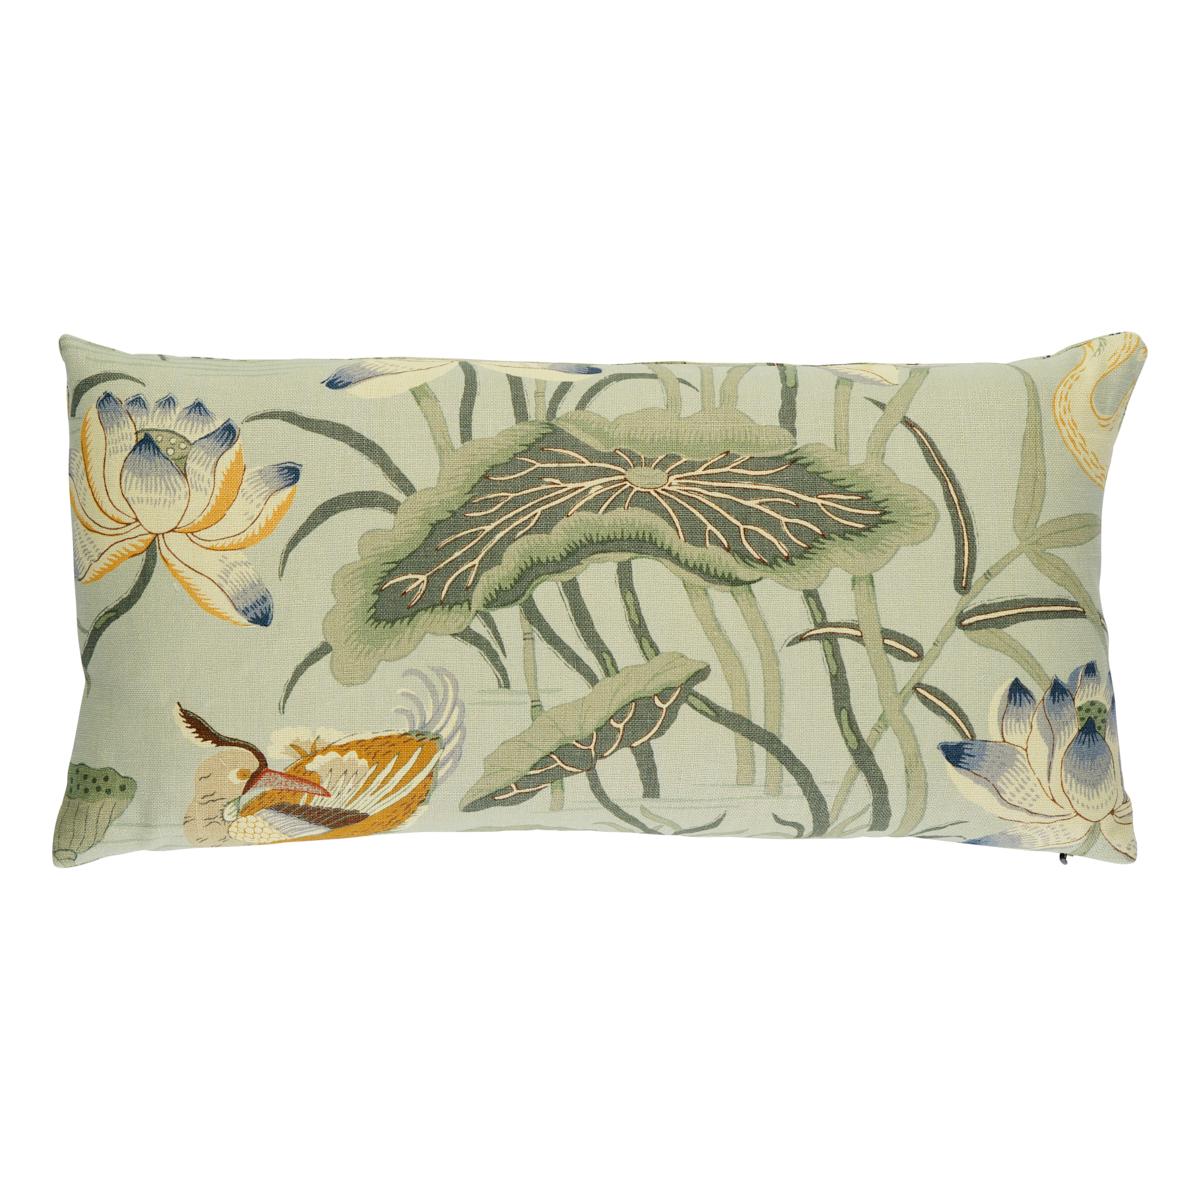 This pillow features Lotus Garden with a knife edge finish. Lotus Garden is an enchanting pattern recreated from a 1920s document in our archives. The masterful design is an ode to Japanese natural motifs. Pillow includes a feather/down fill insert